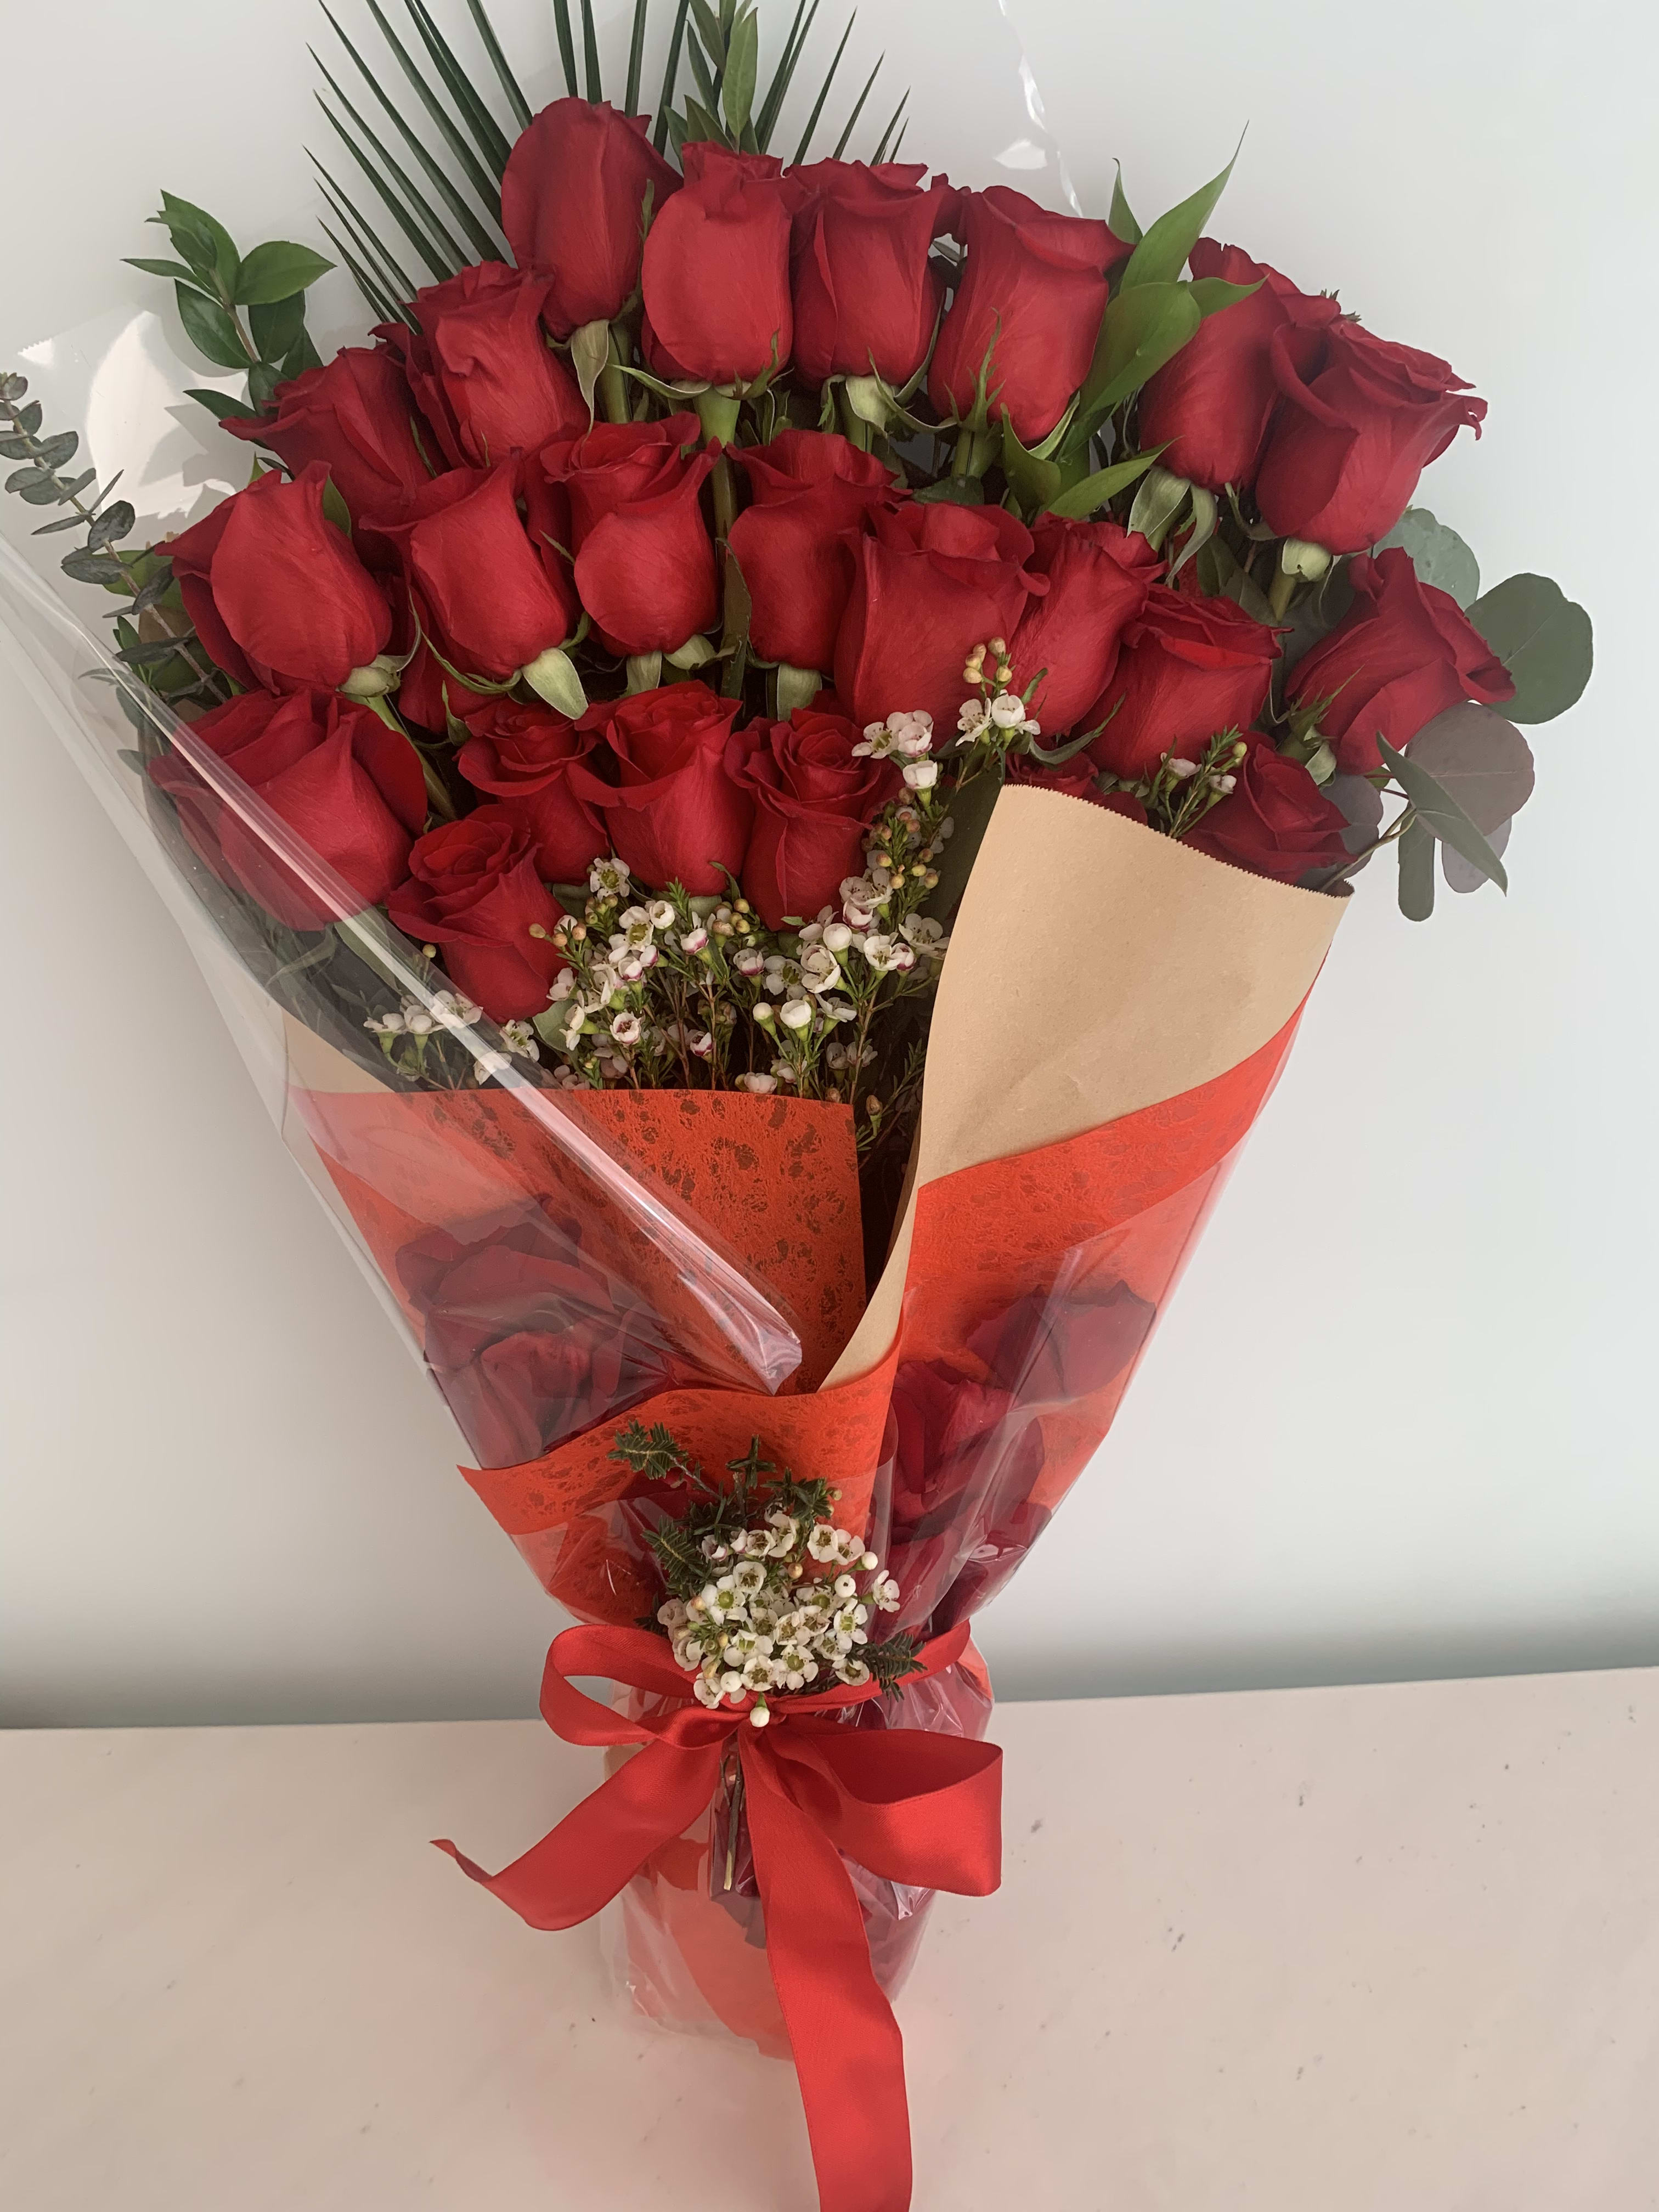 25 Red Roses Bouquet  - 25 long stem first class red roses amazing  presentación to impress includes exotics greenery 